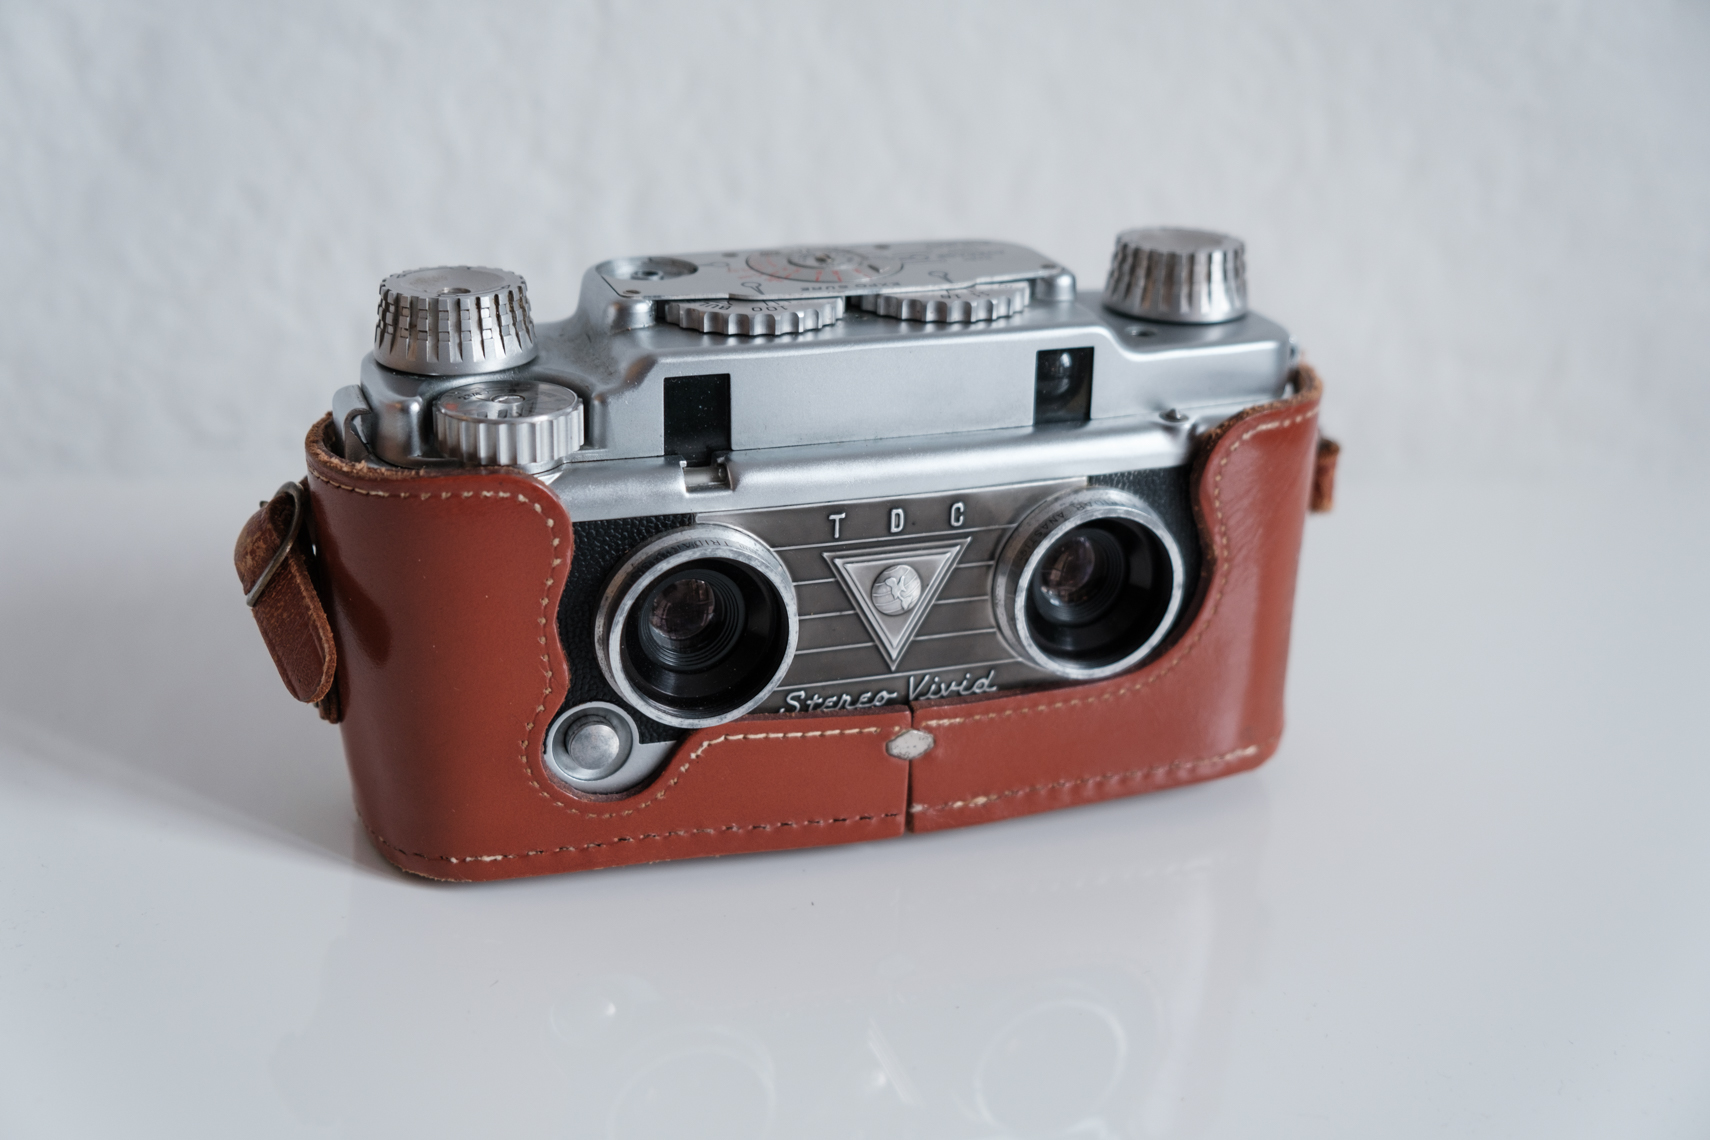 Bell and Howell 35mm stereo camera made in the 1950s.